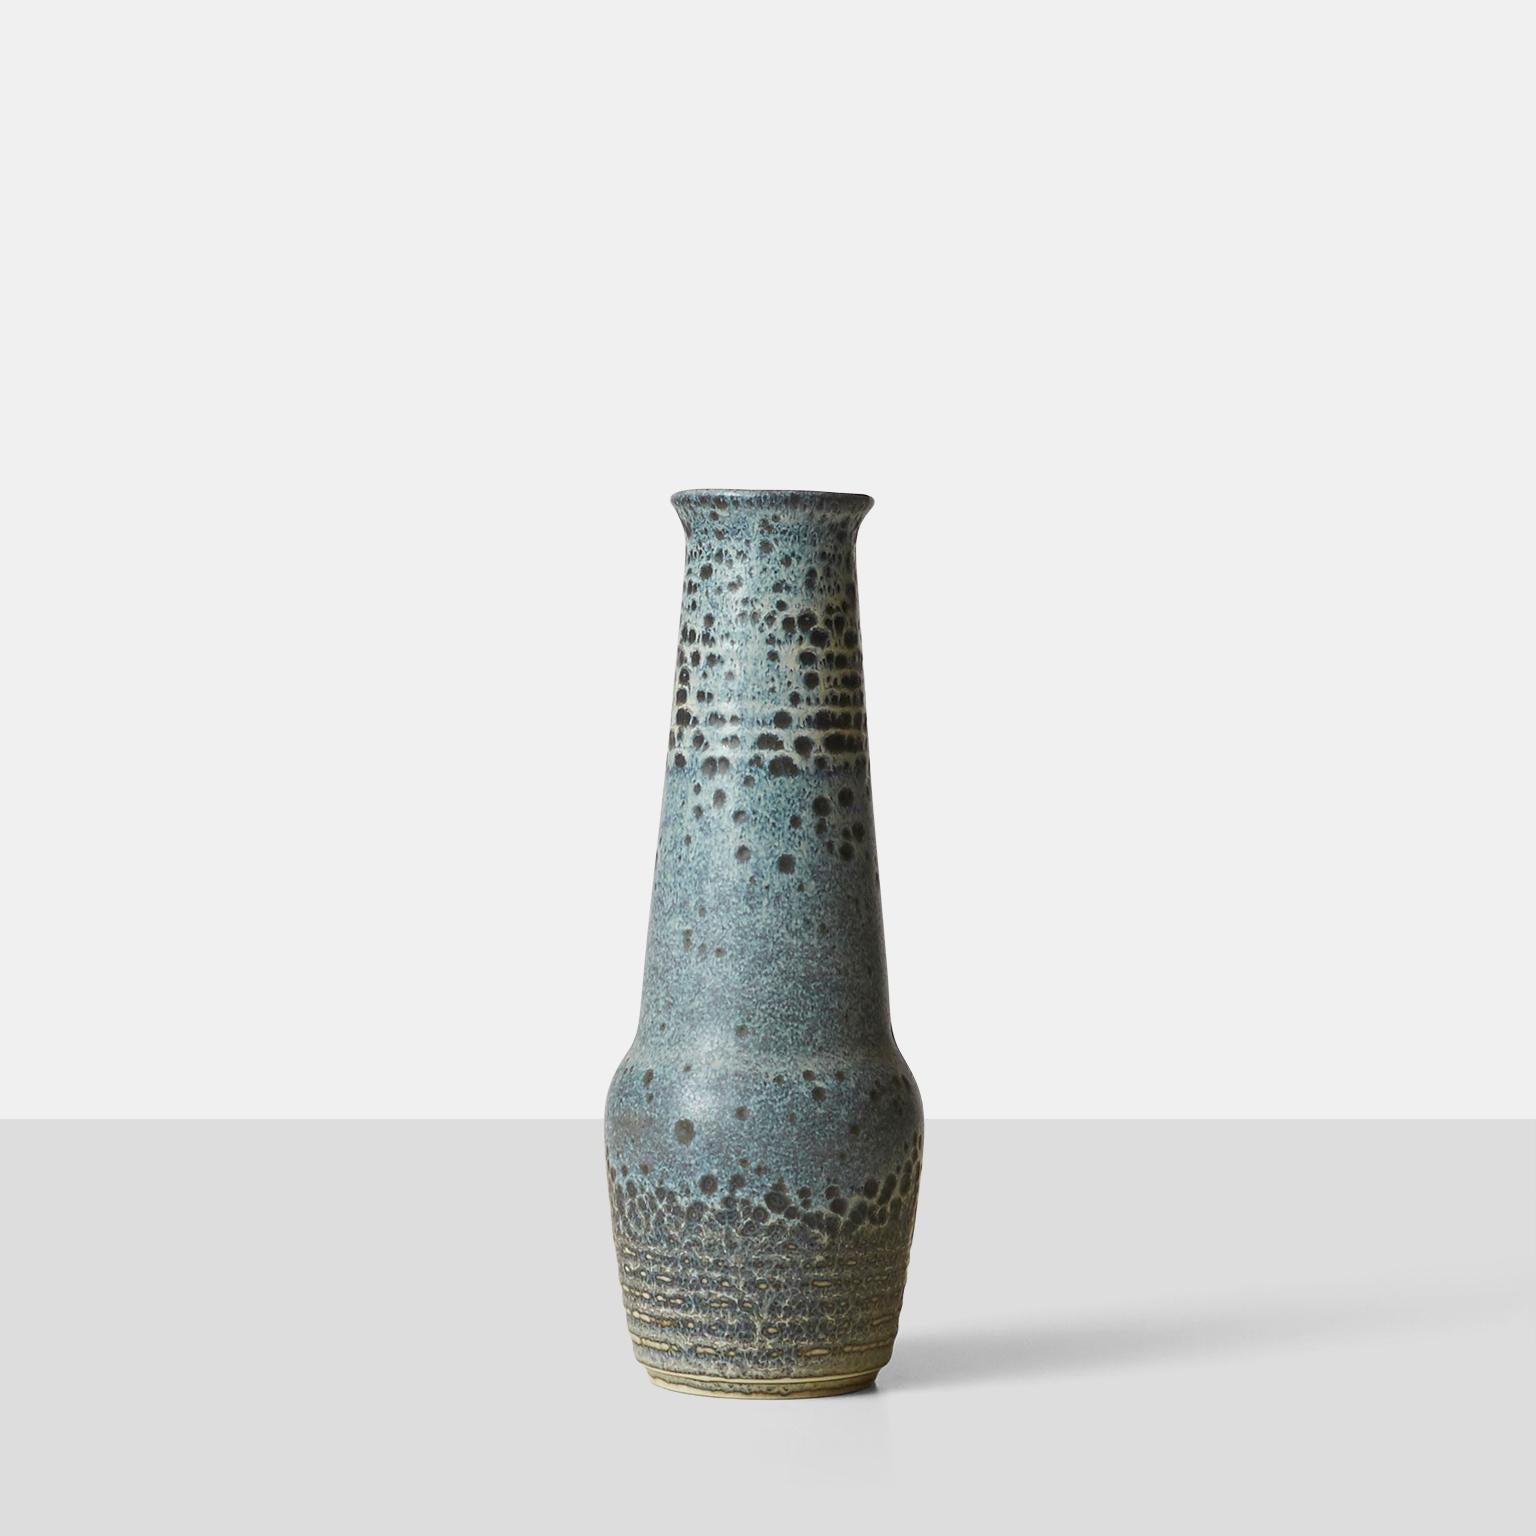 A long necked Gunnar Nylund ceramic vase with mottled blue and grey glaze. Incised with maker's mark and designer's initials 